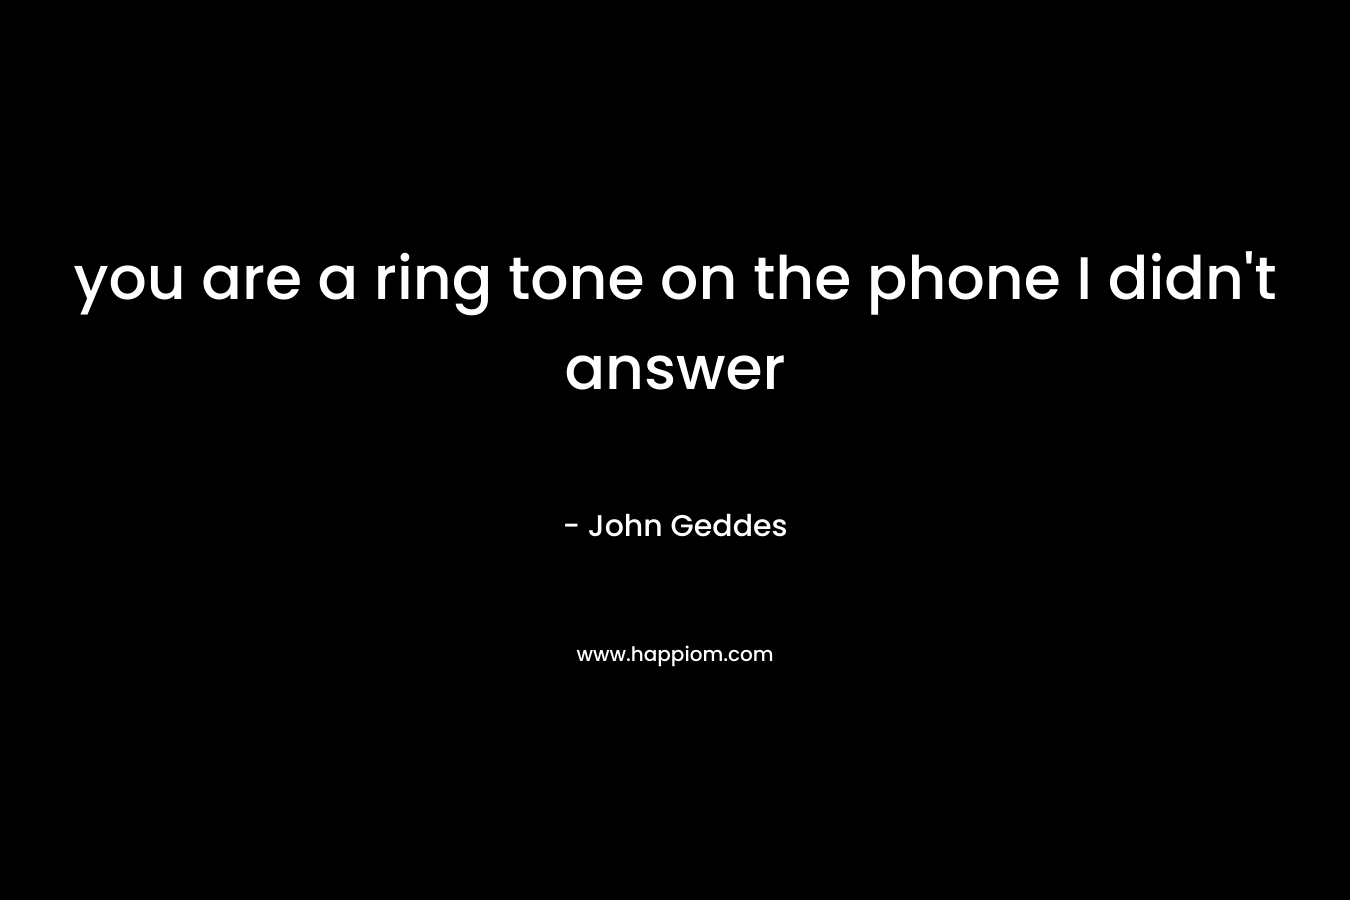 you are a ring tone on the phone I didn’t answer – John Geddes